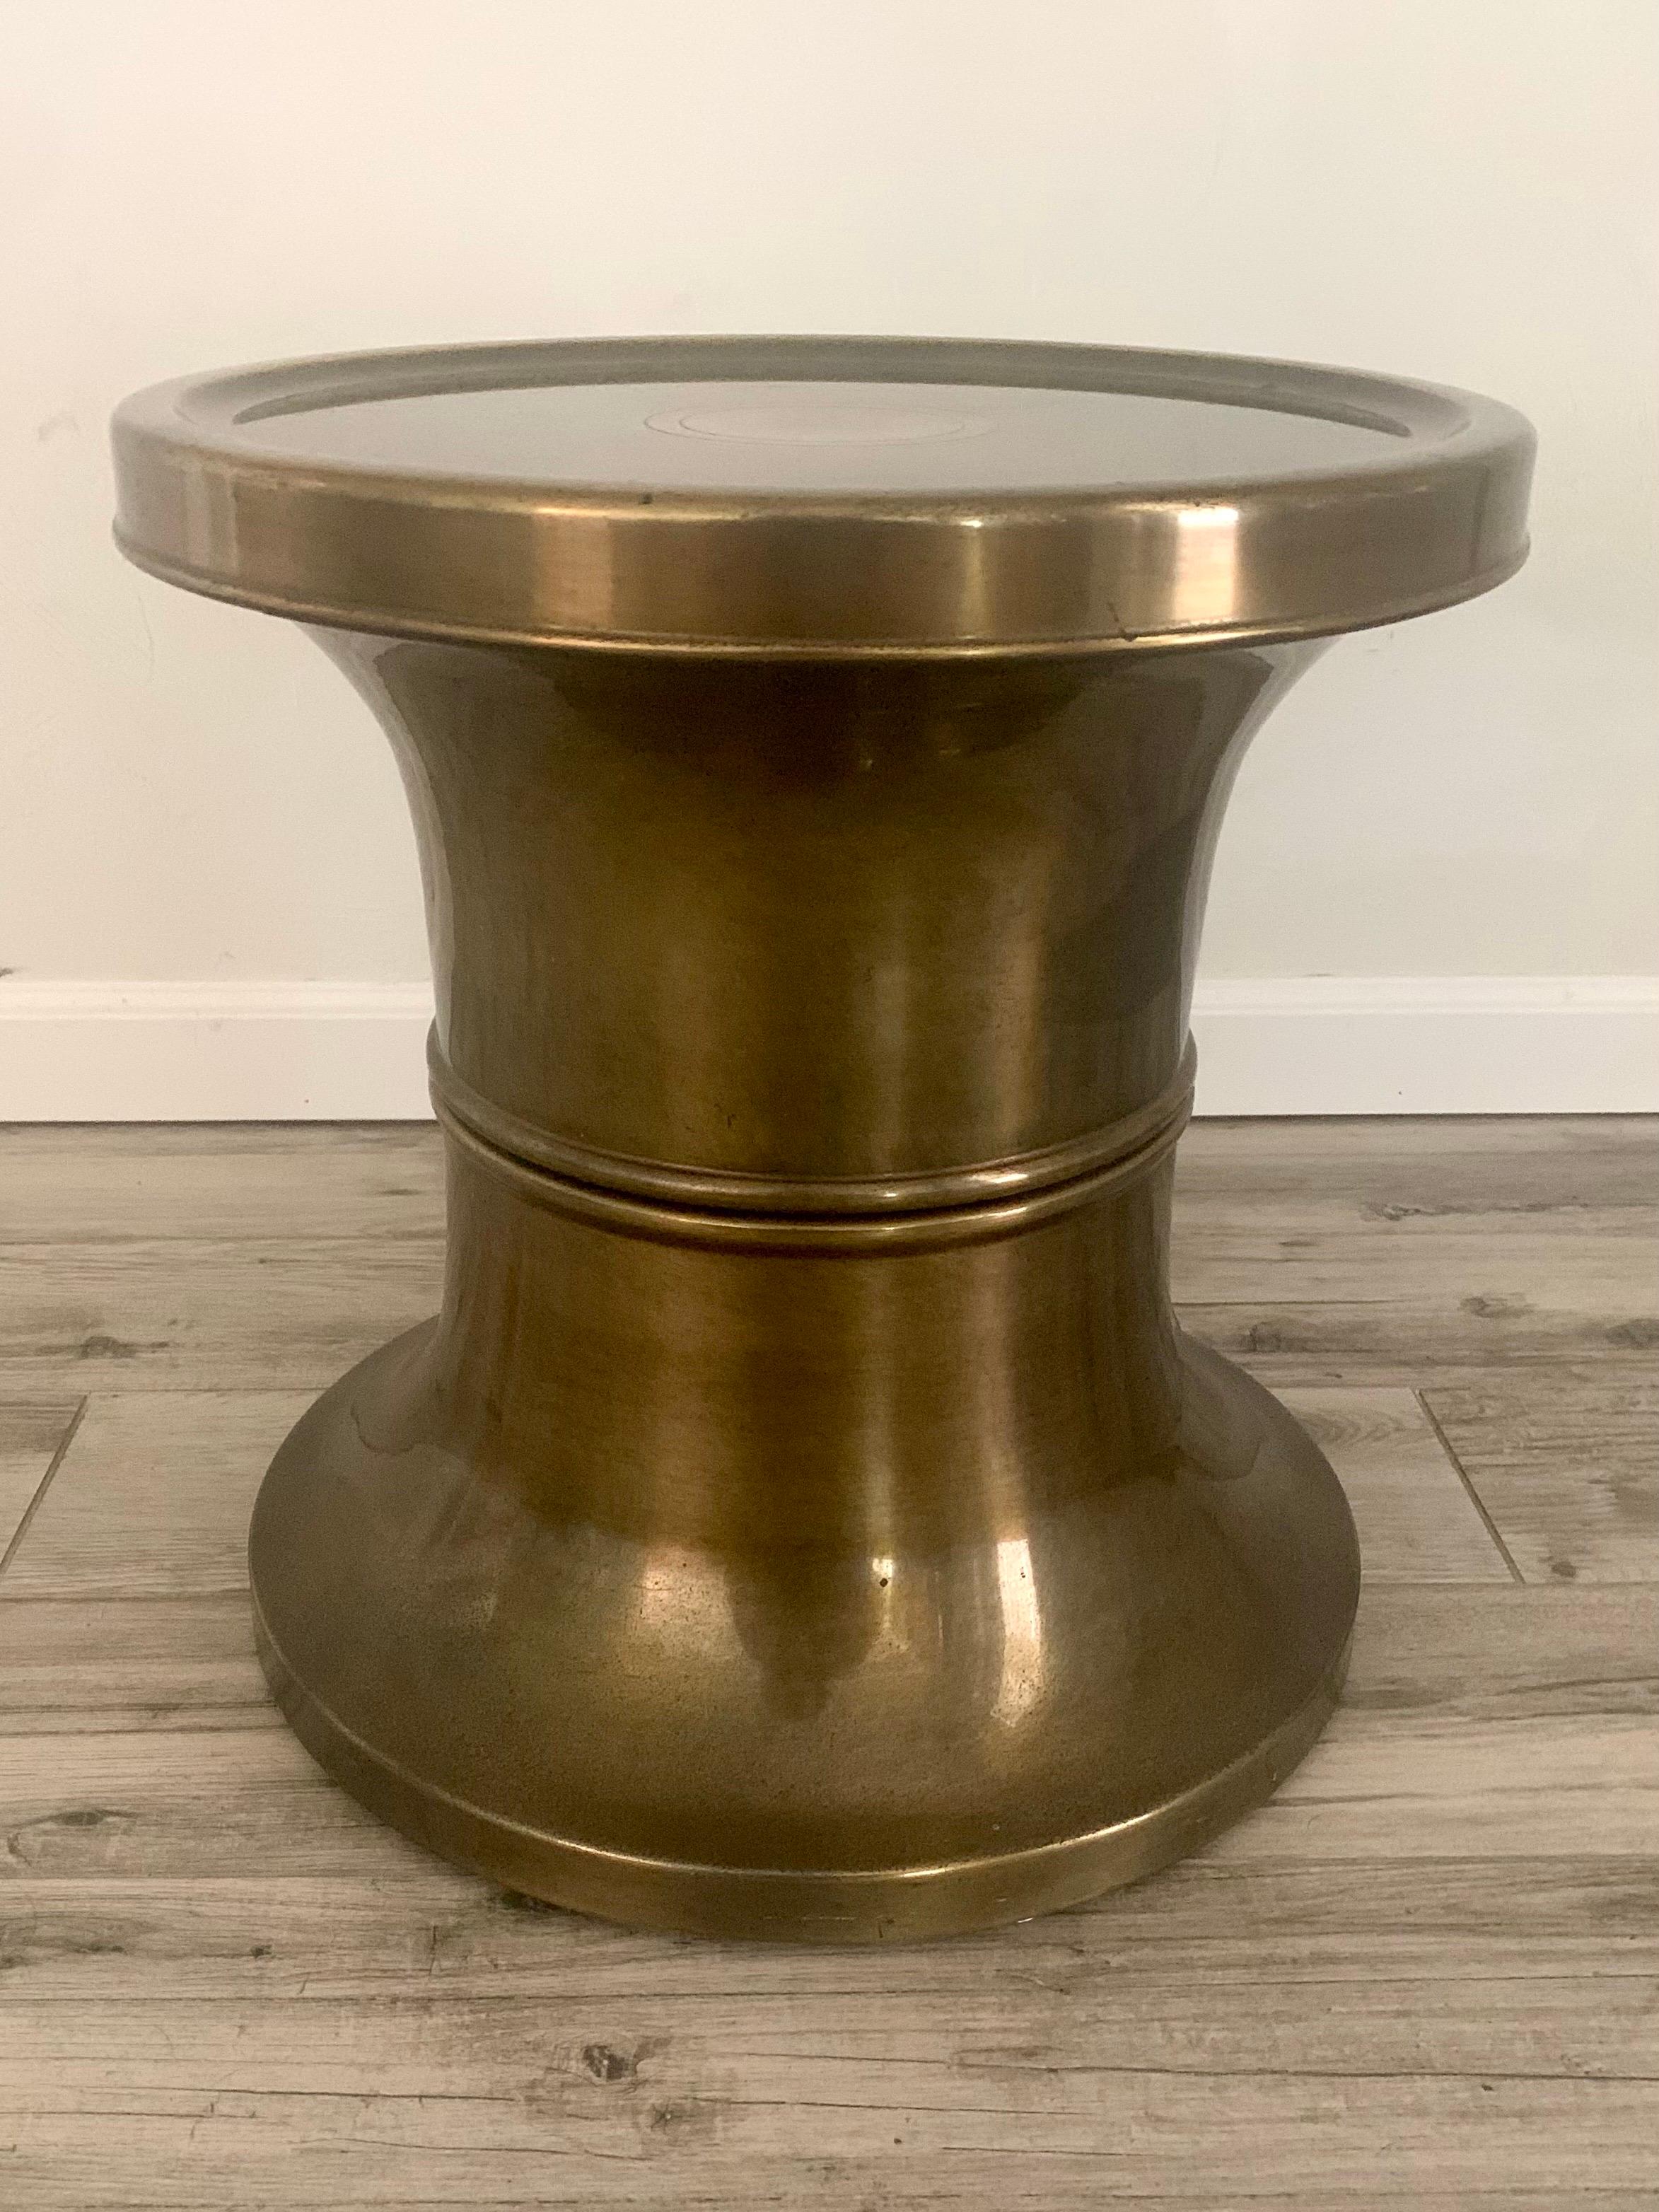 Side table by Mastercraft in brass. Has an antiqued bronze finish that has aged beautifully. It is a lacquered finish. 

Small signs of wear and tasteful patina denoting the age of this piece. 

Has a very high quality build and could be used as a